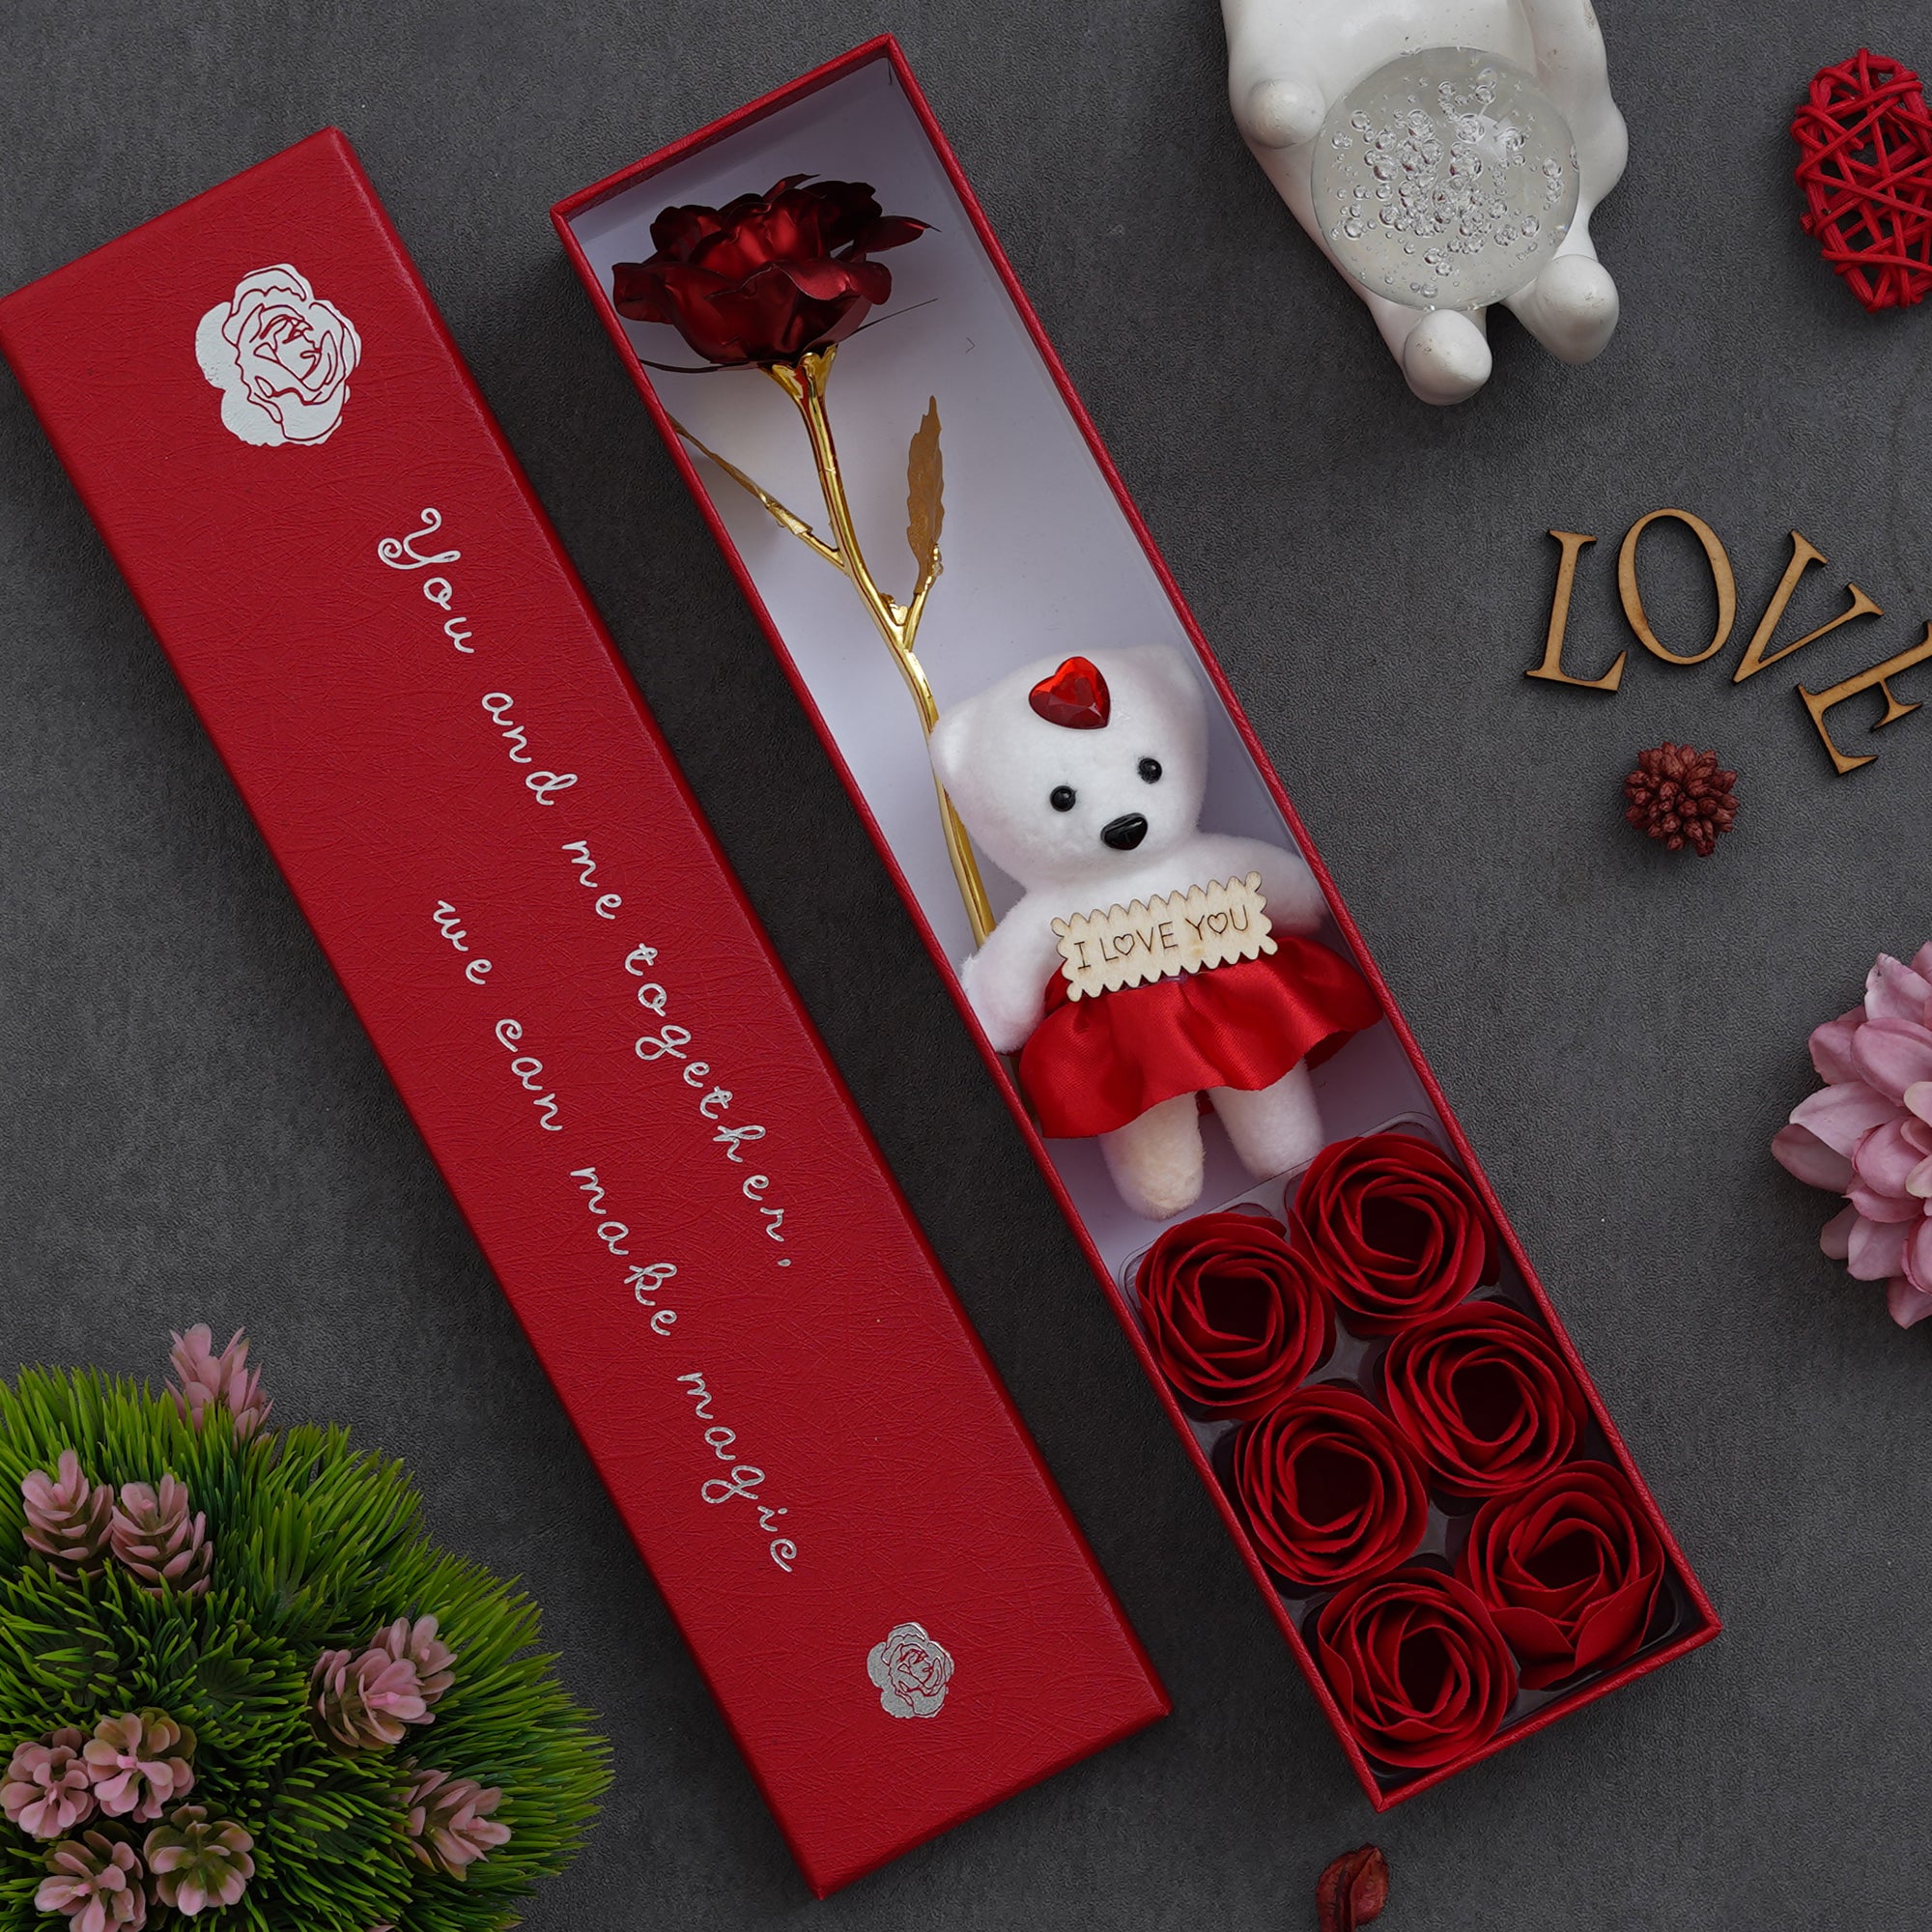 Valentine Combo of Set of 8 Love Post Cards Gift Cards Set, Red Gift Box with Teddy & Roses, Wooden Box "For You" Message Bottle Set 3